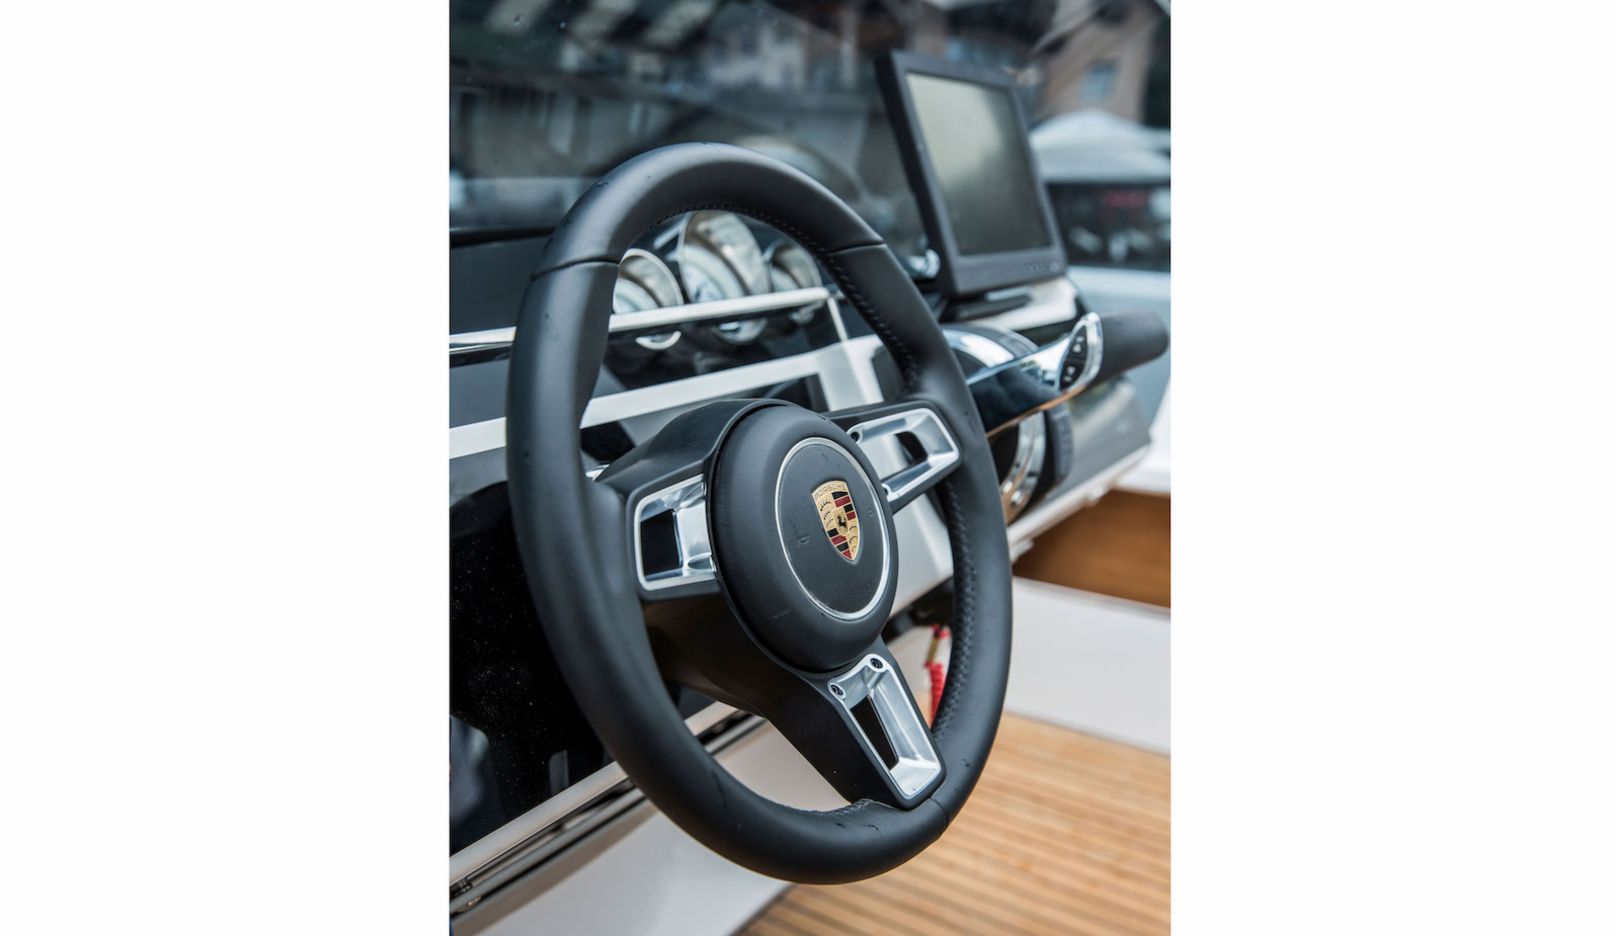 For use at sea, the steering wheel has been upholstered with saltwater-resistant imitation leather.